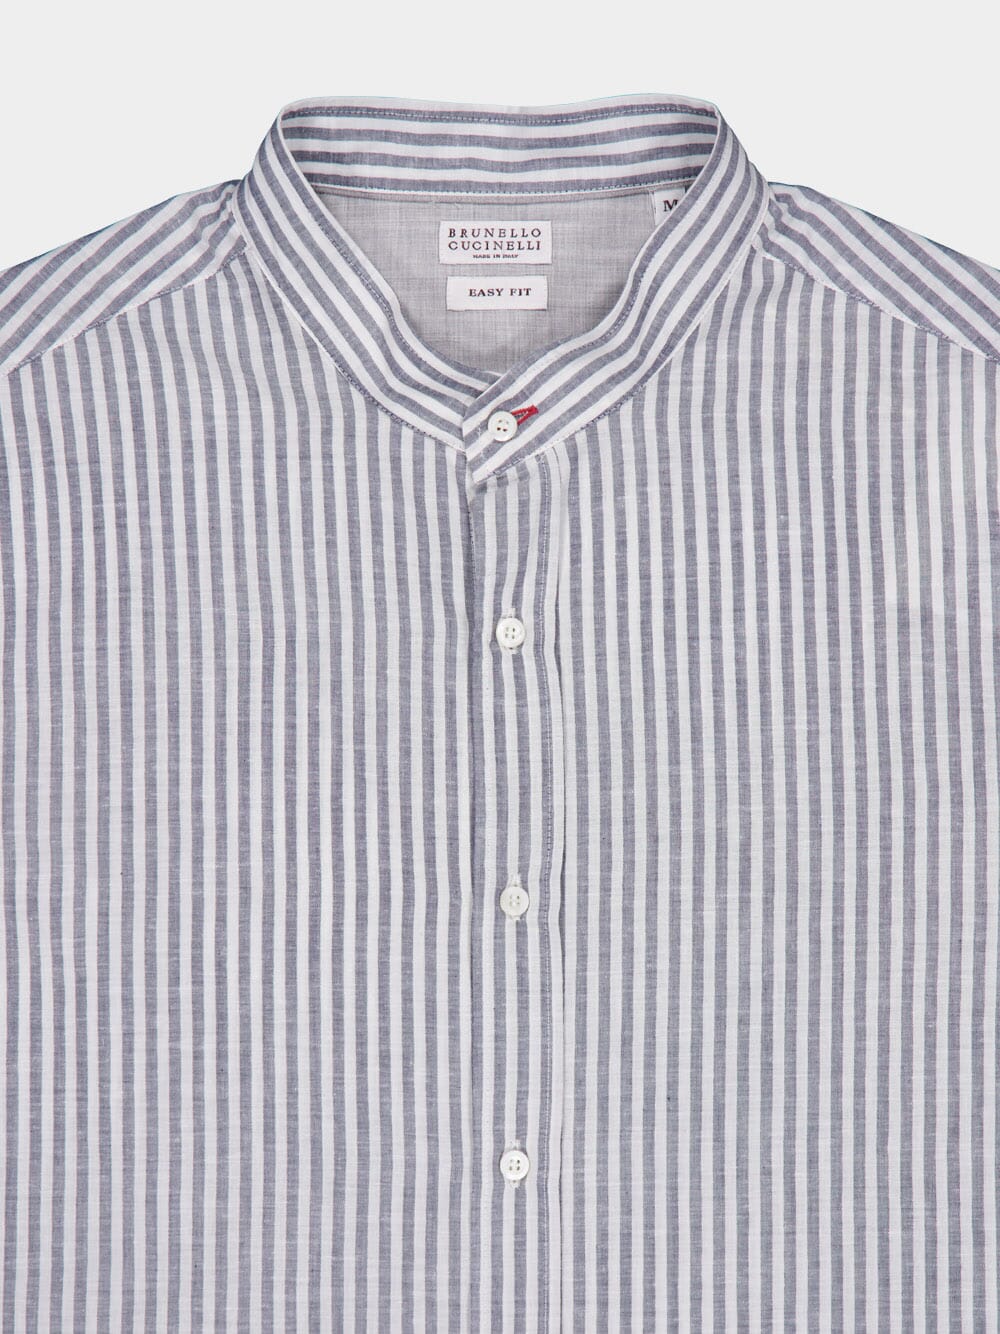 Brunello CucinelliLong-Sleeve Striped Buttoned Shirt at Fashion Clinic